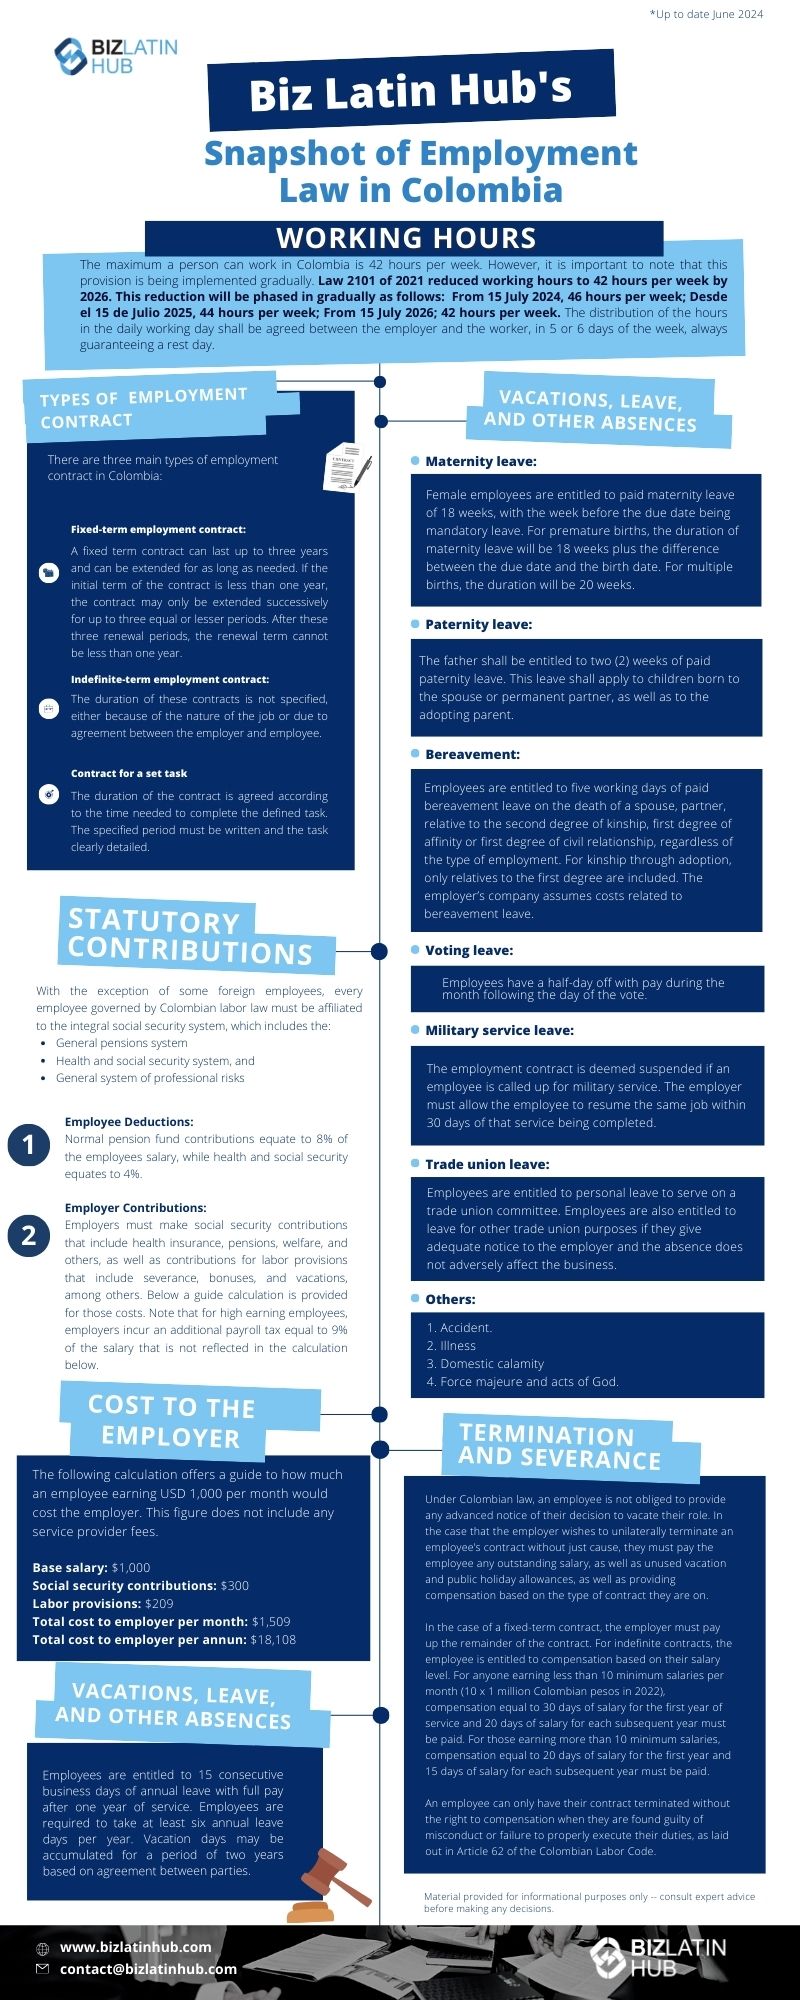 Infographic titled "Biz Latin Hub's Snapshot of Employment Law in Colombia: Working Hours." It covers topics including types of employment contracts, statutory contributions, cost to the employer, vacations, leave and other absences, and termination rules. The design includes blue and white sections with icons and text, and the website URL is displayed at the bottom.